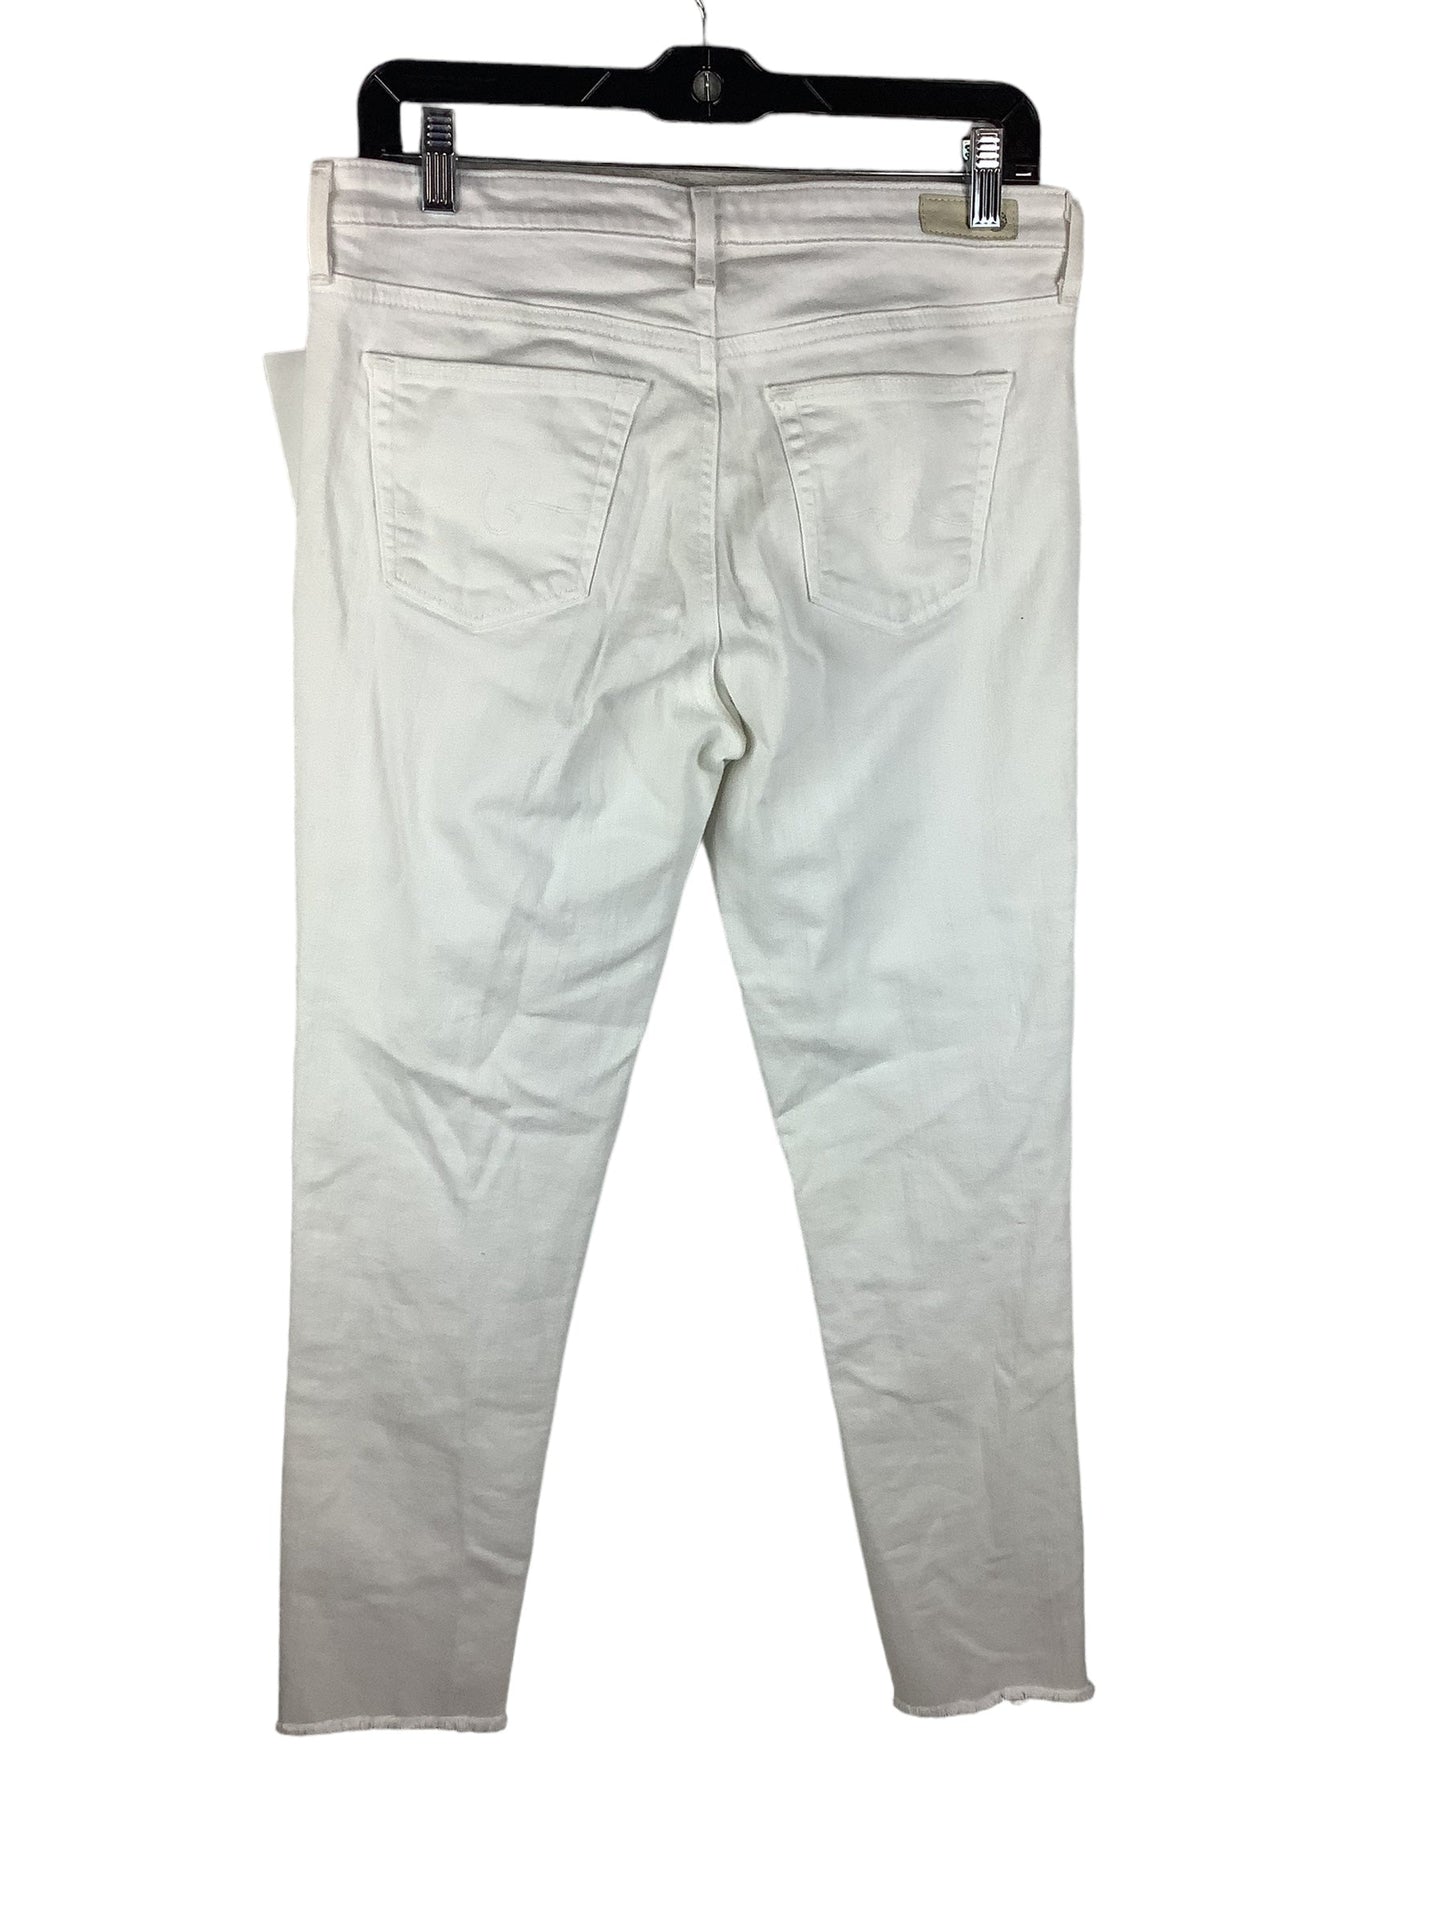 White Pants Designer Adriano Goldschmied, Size 8